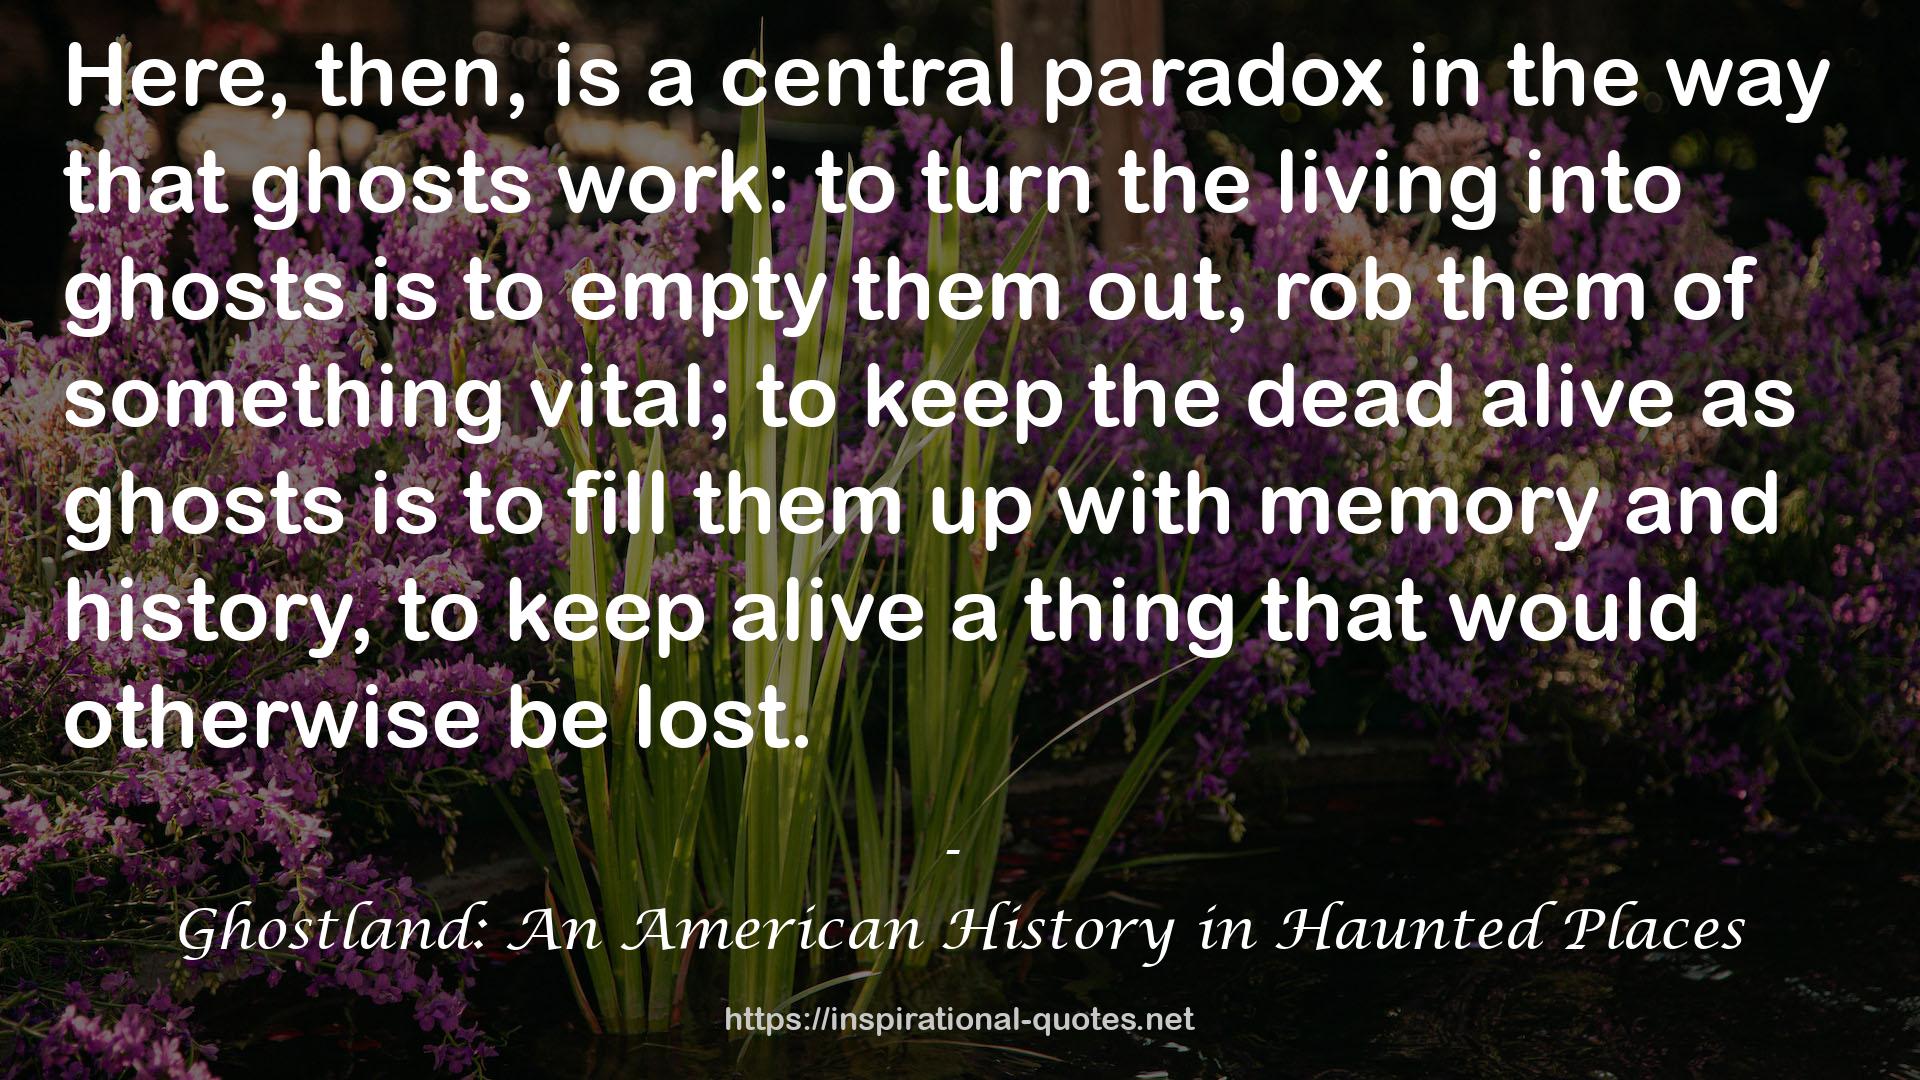 Ghostland: An American History in Haunted Places QUOTES